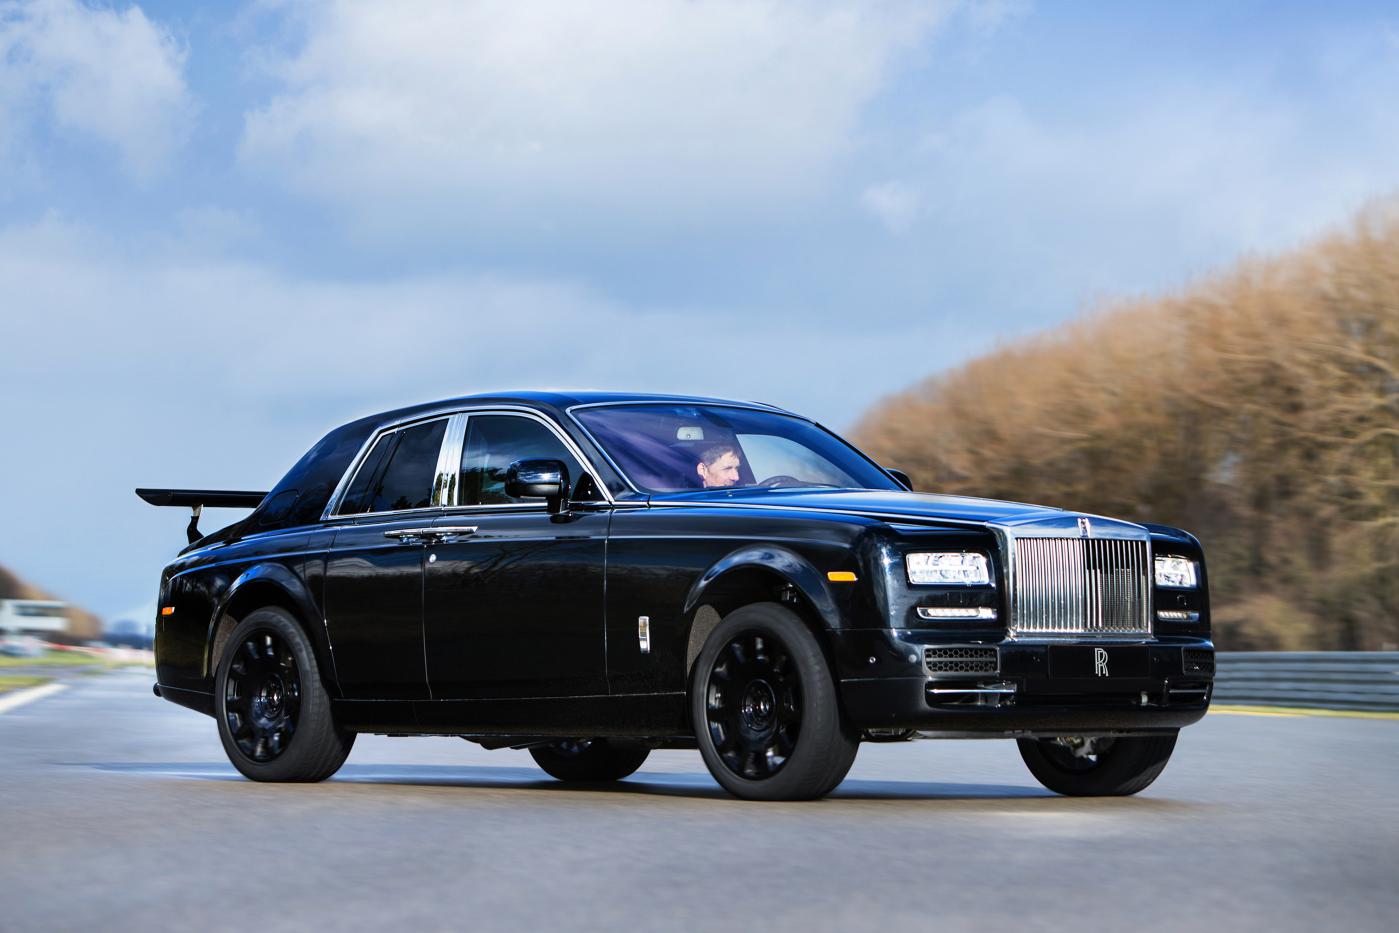 Rolls Royce Project Cullinan crossover revealed